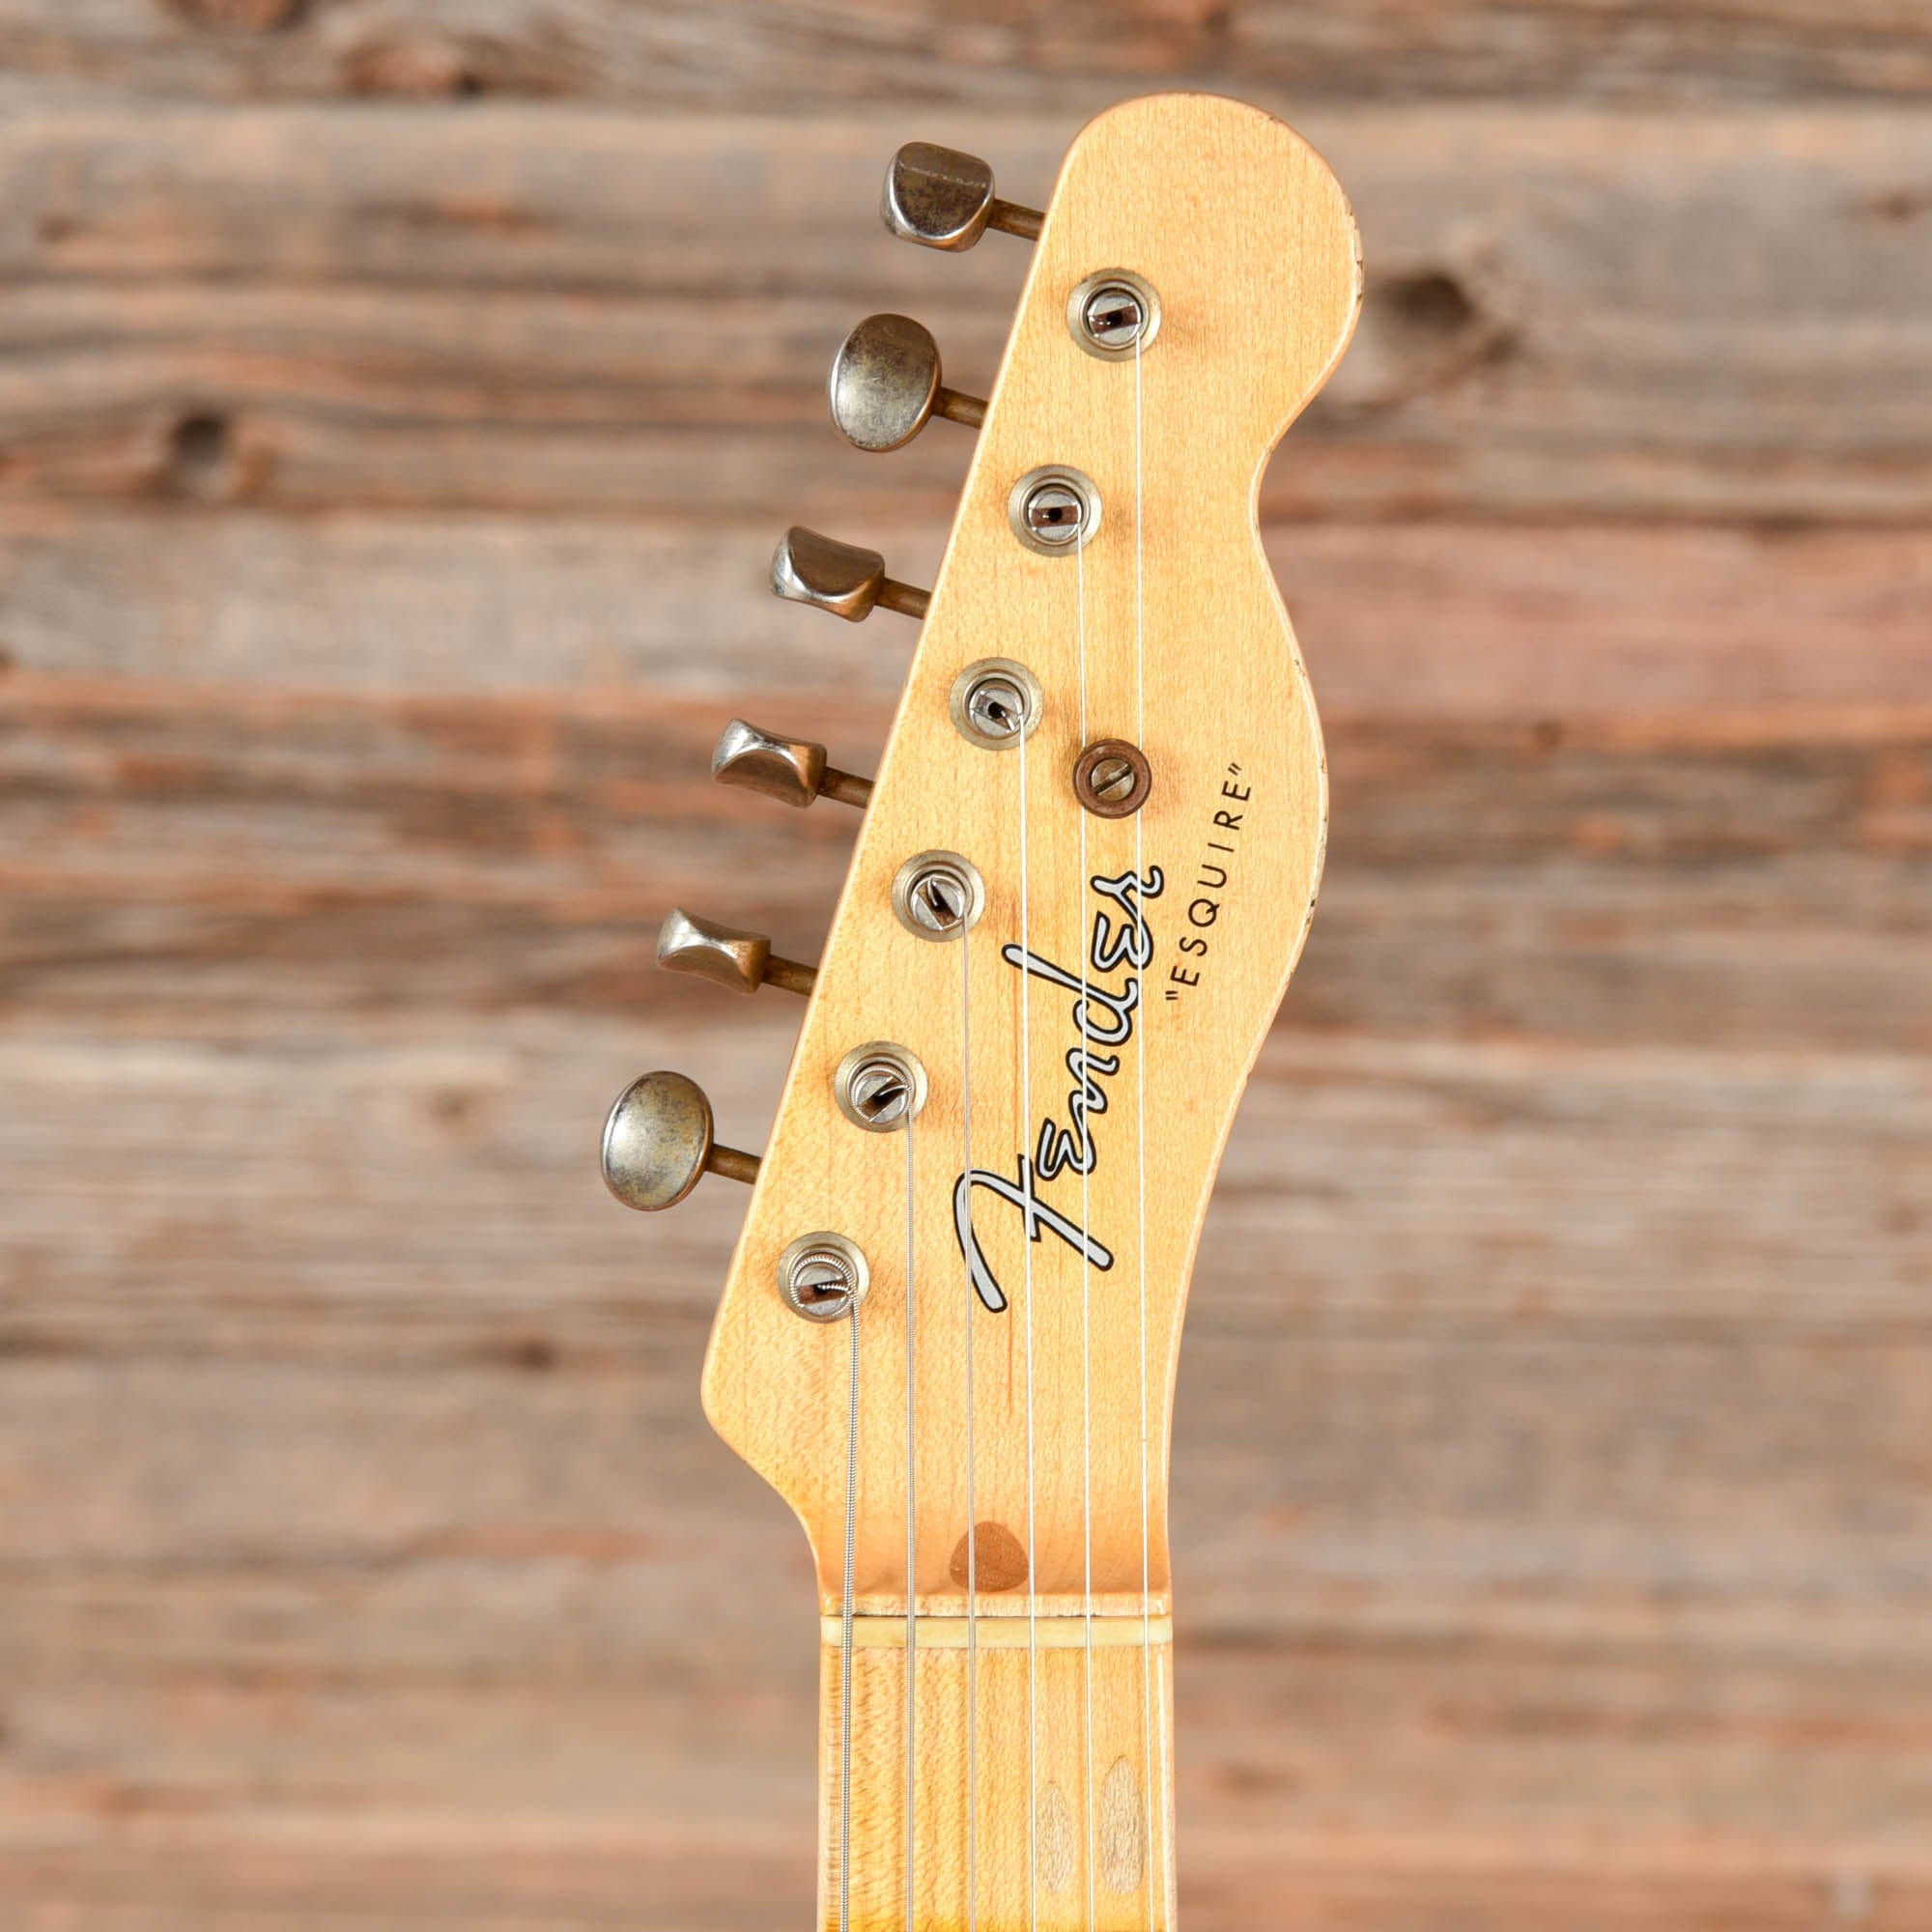 Fender Custom Shop Limited Roasted Pine Double Esquire Aged White Blonde 2021 Electric Guitars / Solid Body